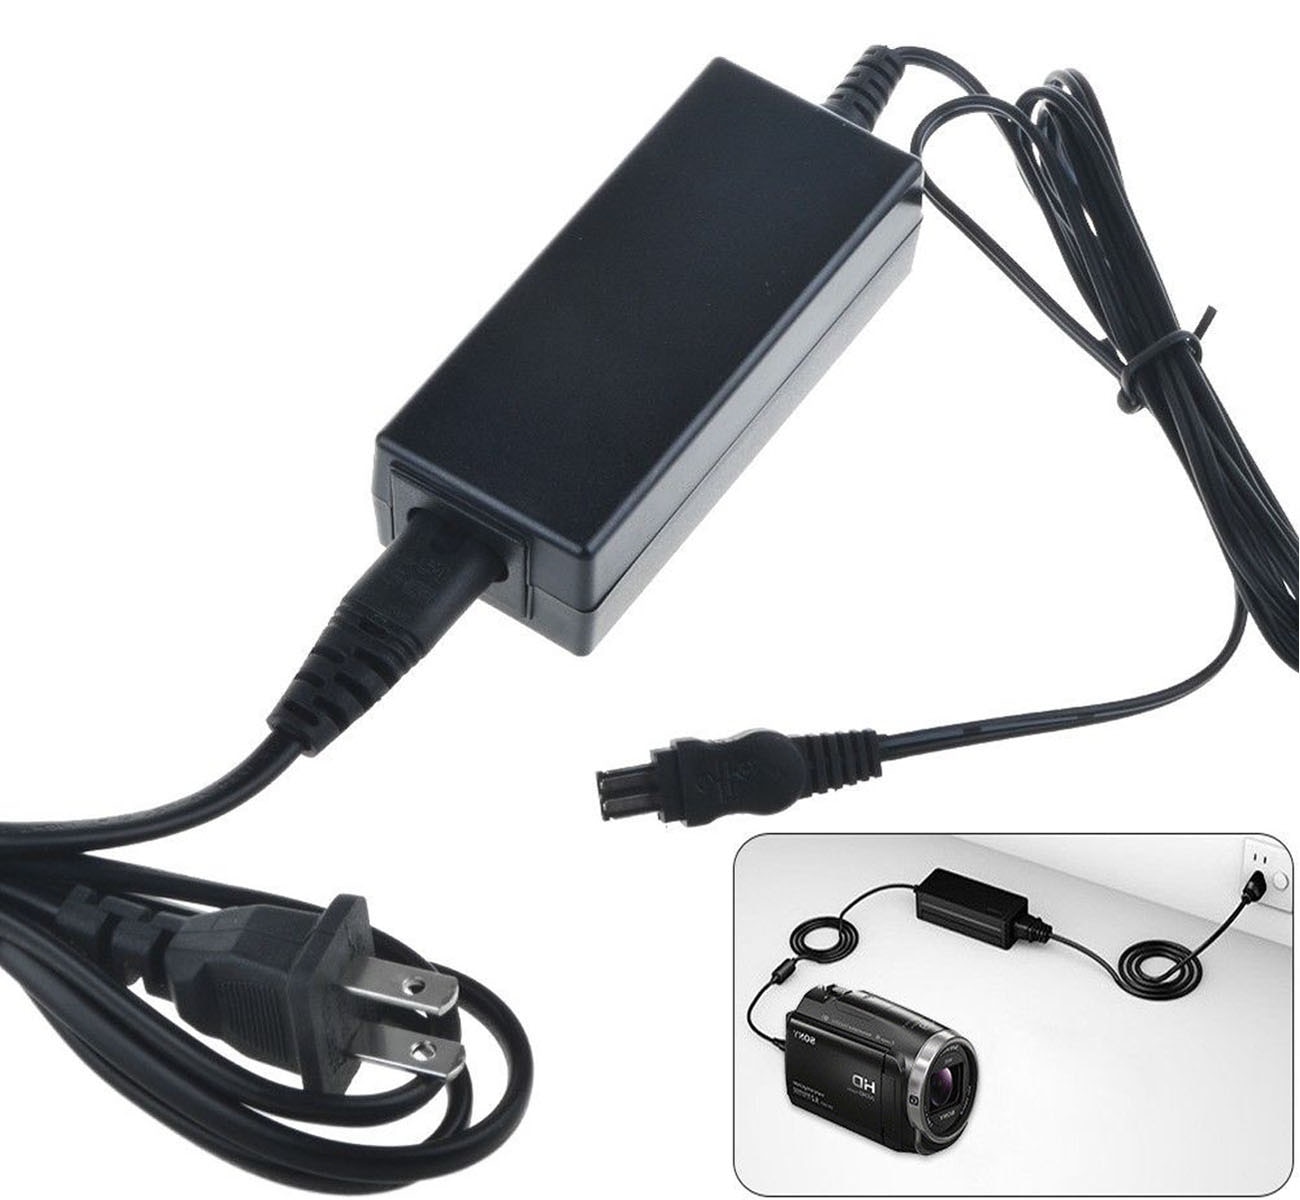 Ac Power Adapter Oplader Voor Sony CCD-TRV55E, CCD-TRV65E, CCD-TRV66E, CCD-TRV67E, CCD-TRV68E, CCD-TRV69E Handycam Camcorder